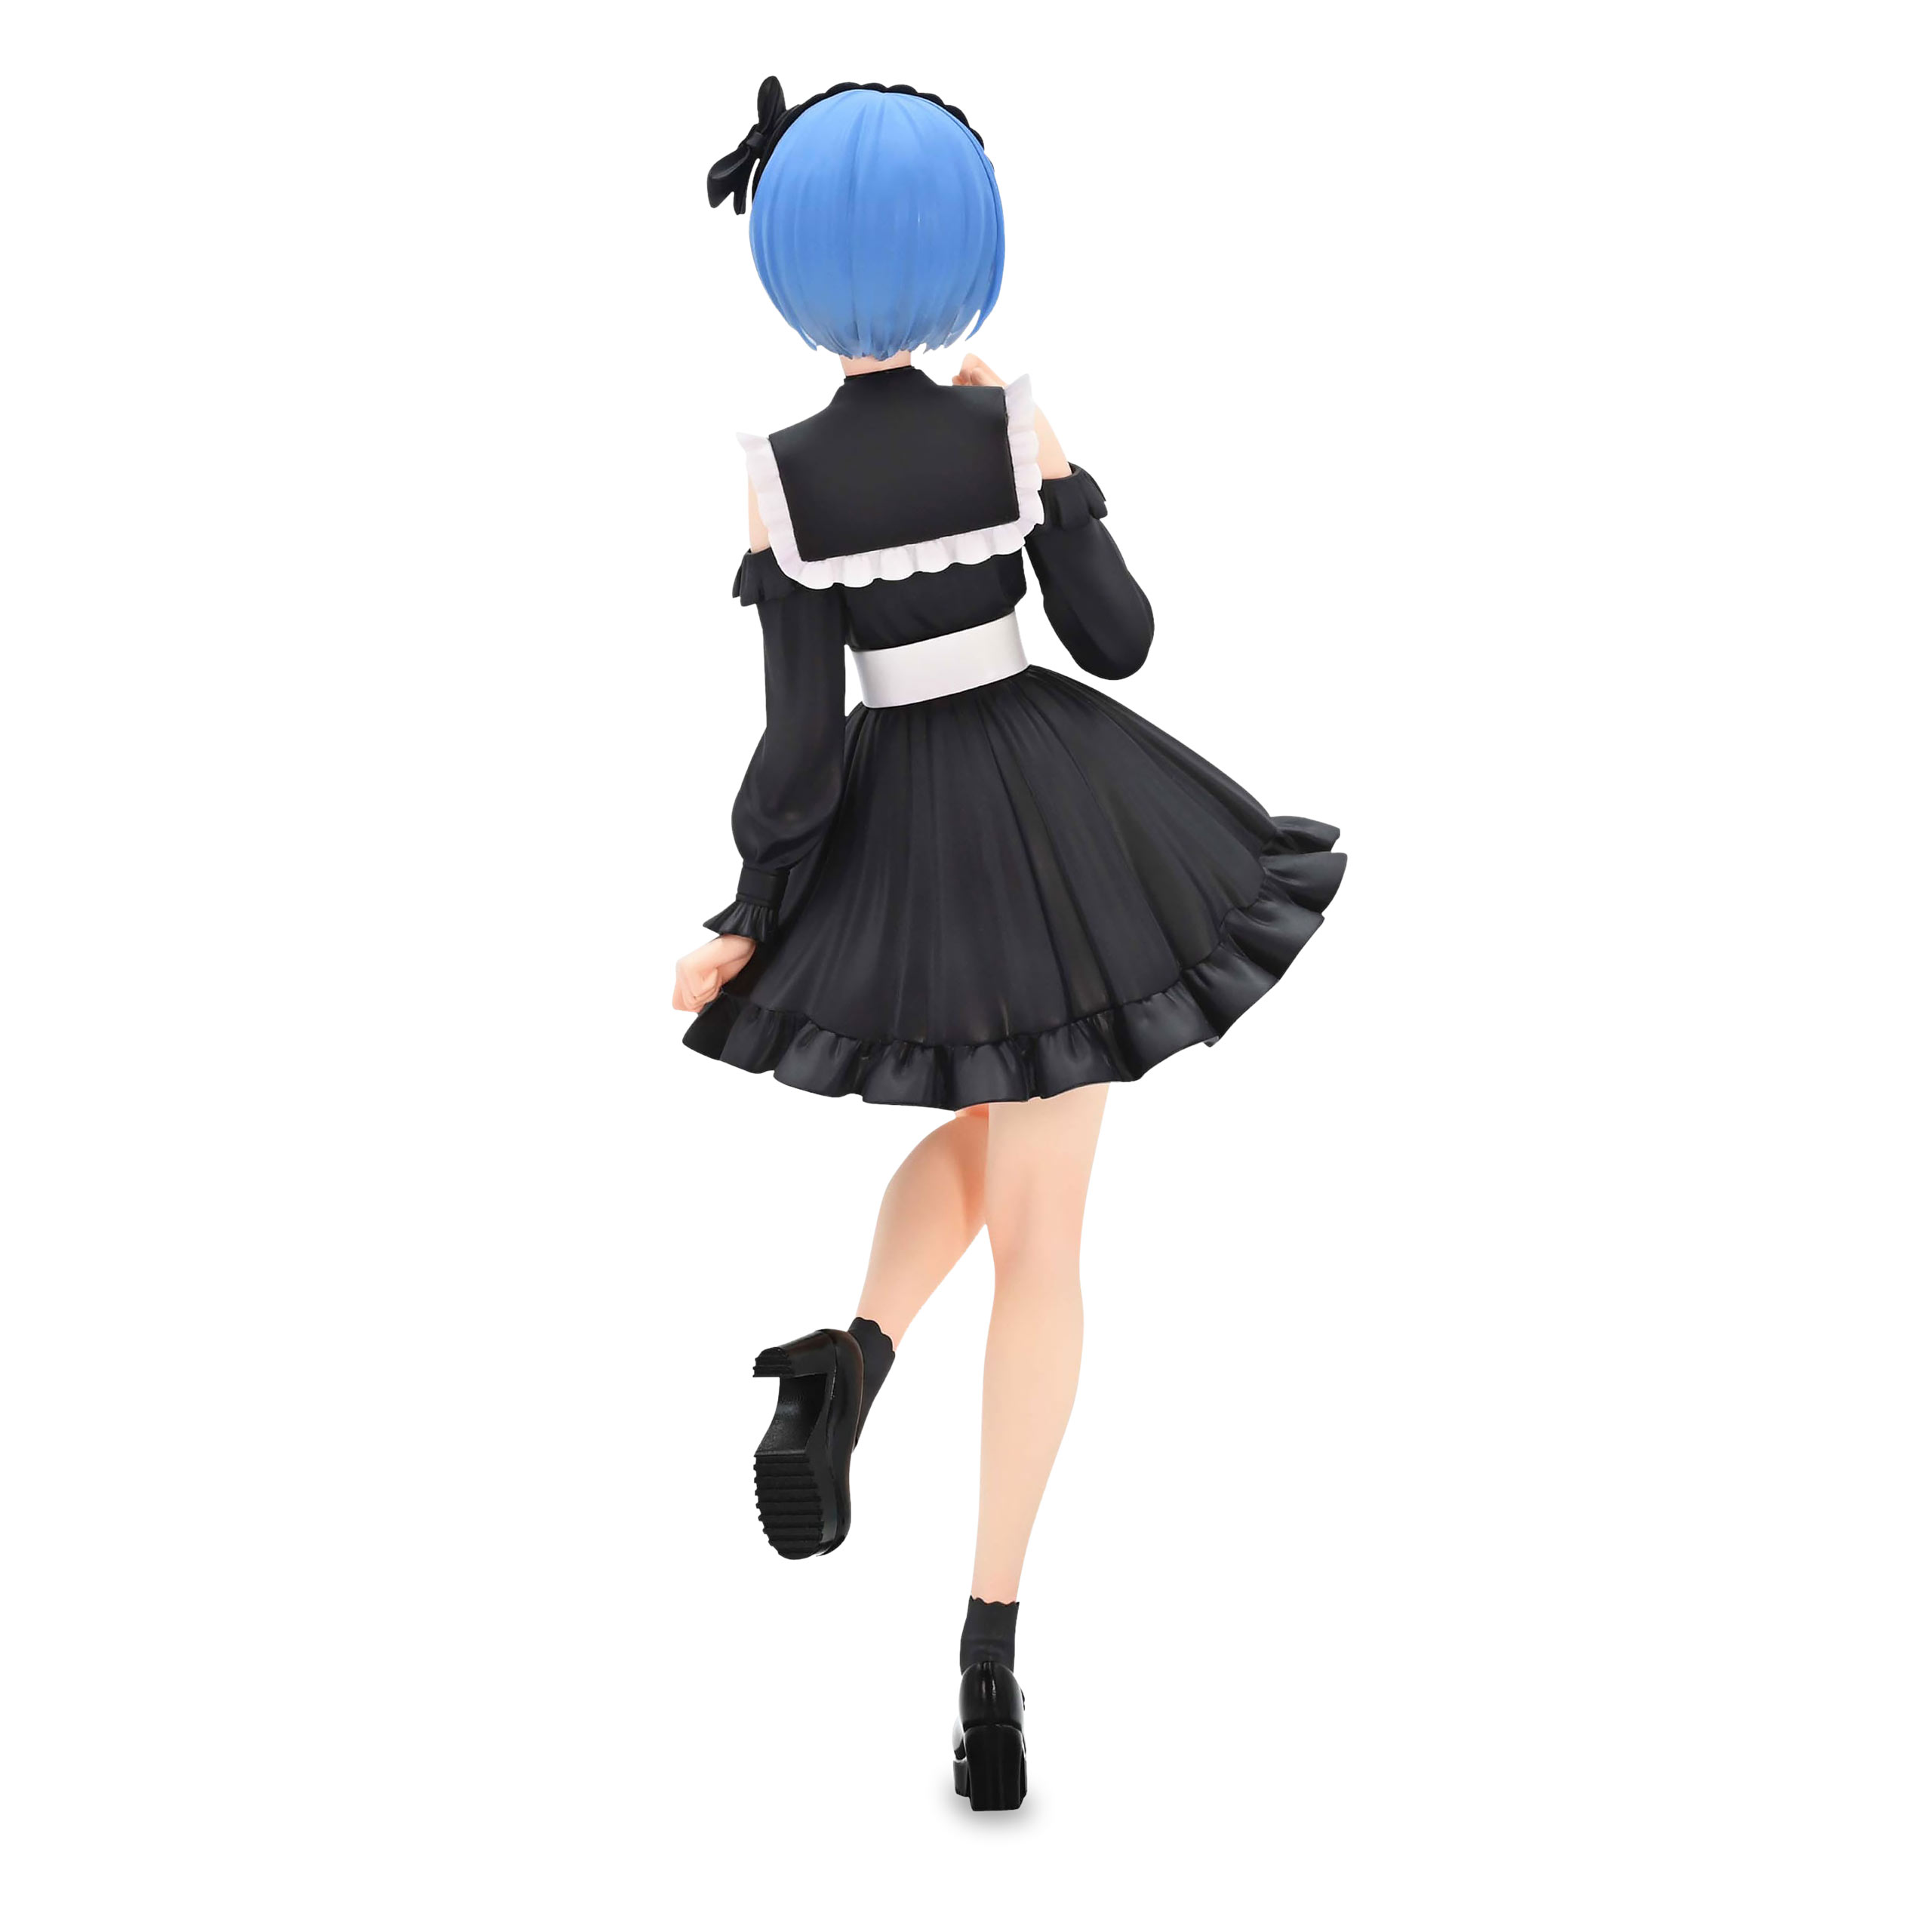 Re:Zero - Figurine Rem Girly Outfit Noir